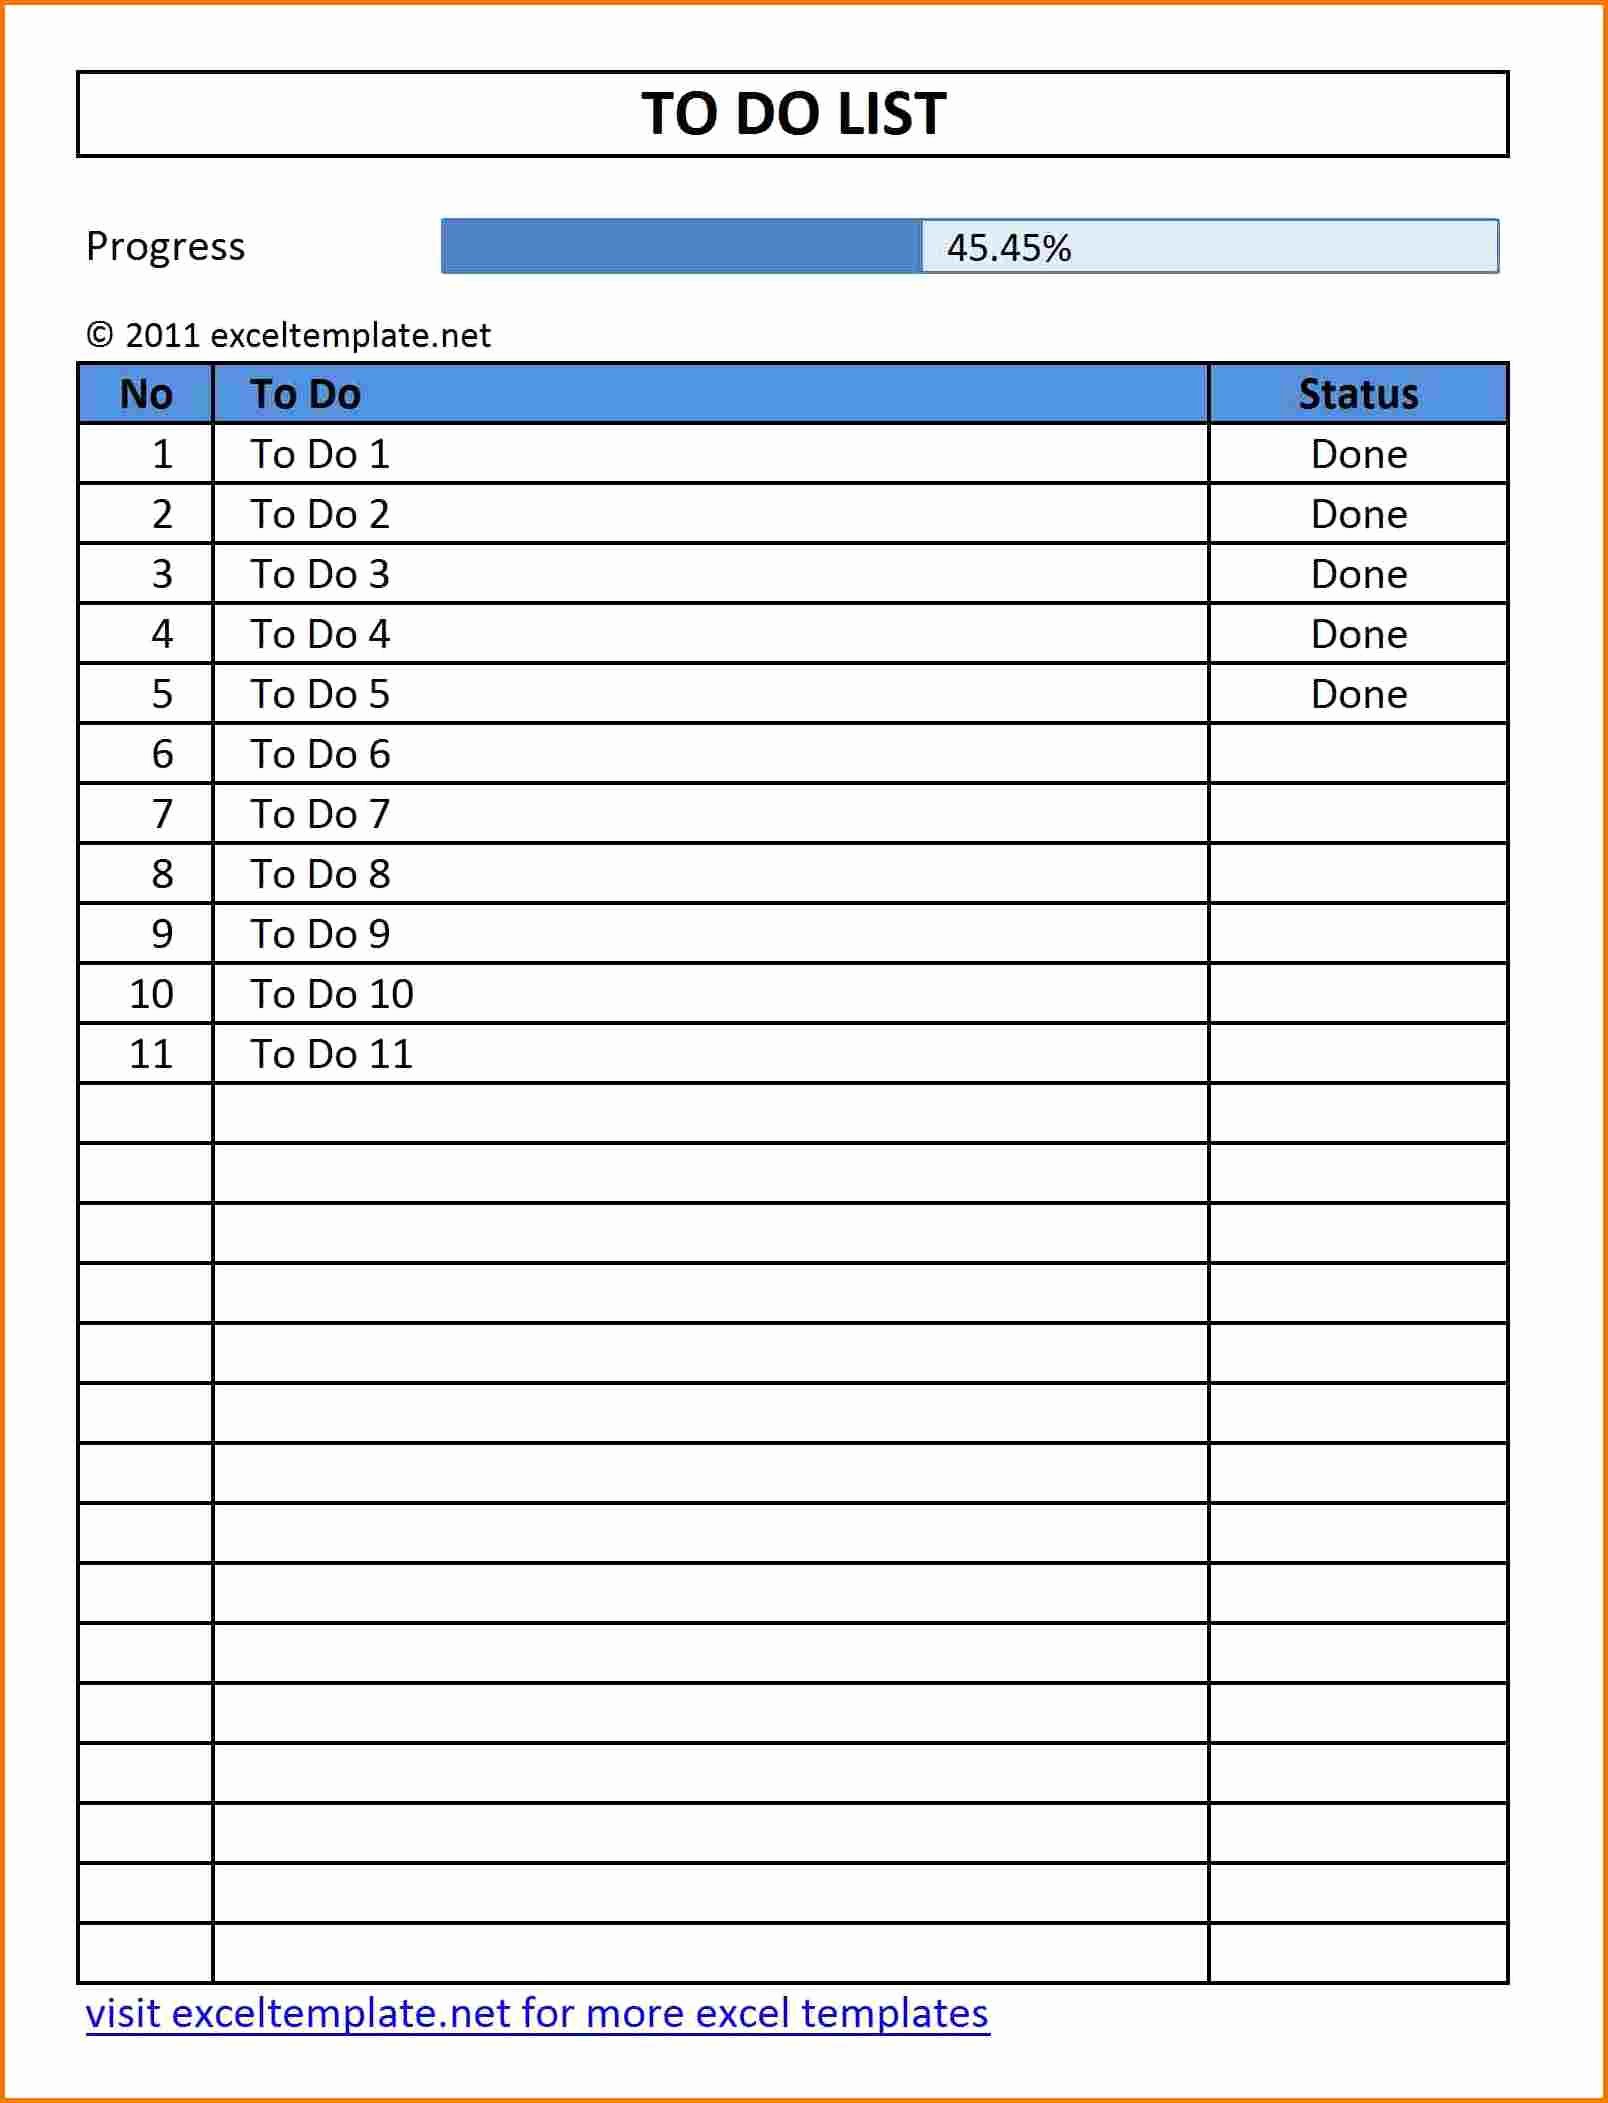 Daily Task Template